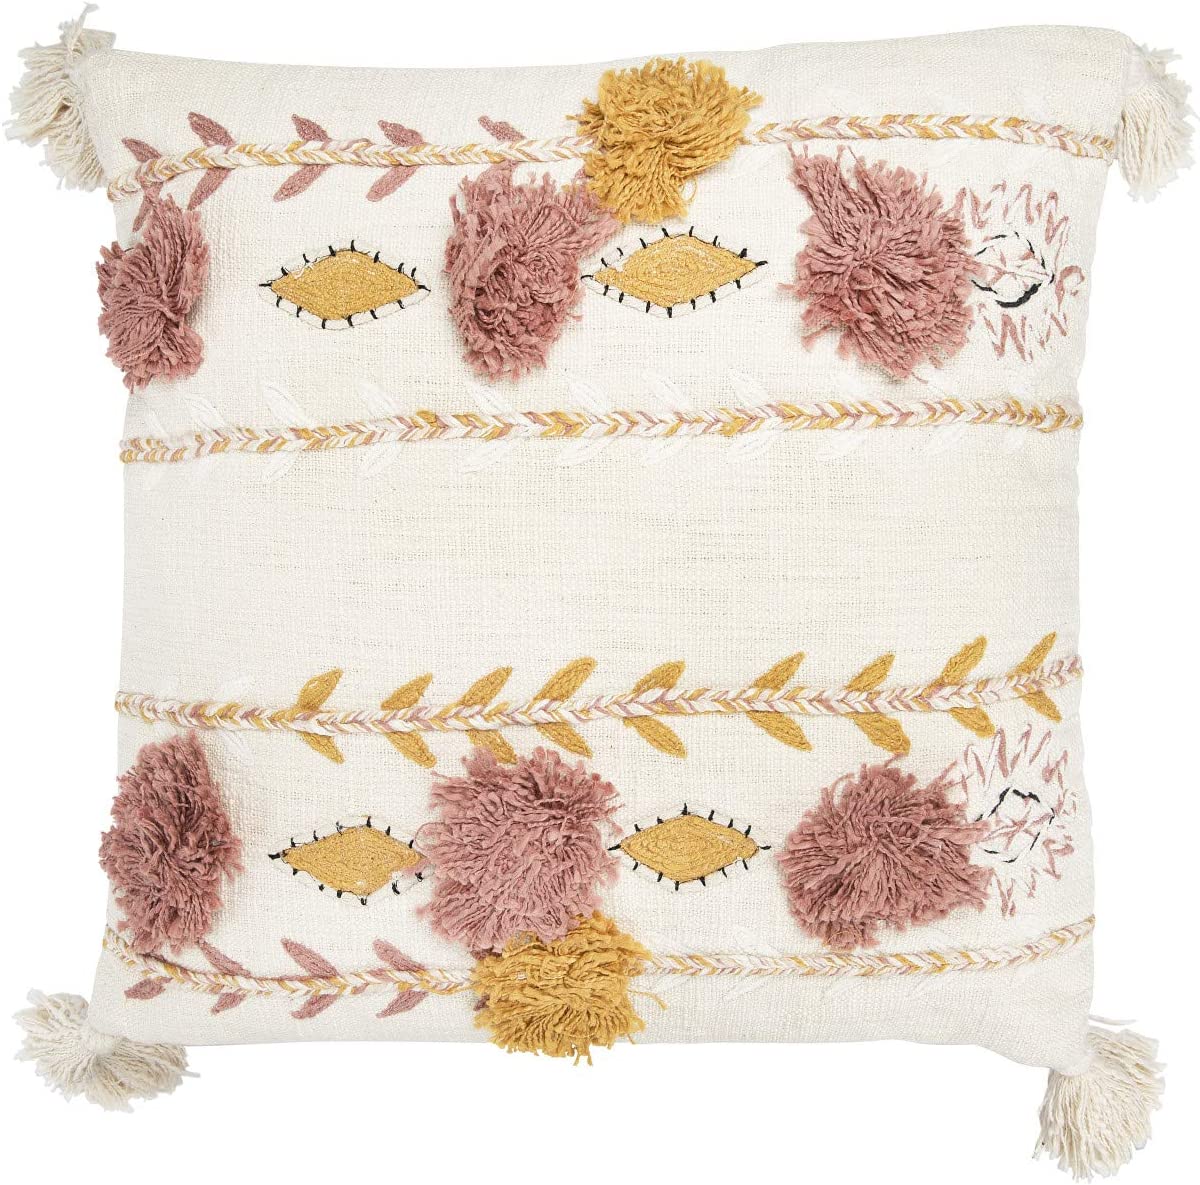 Embroidered Mustard & Rose Poms Pillows